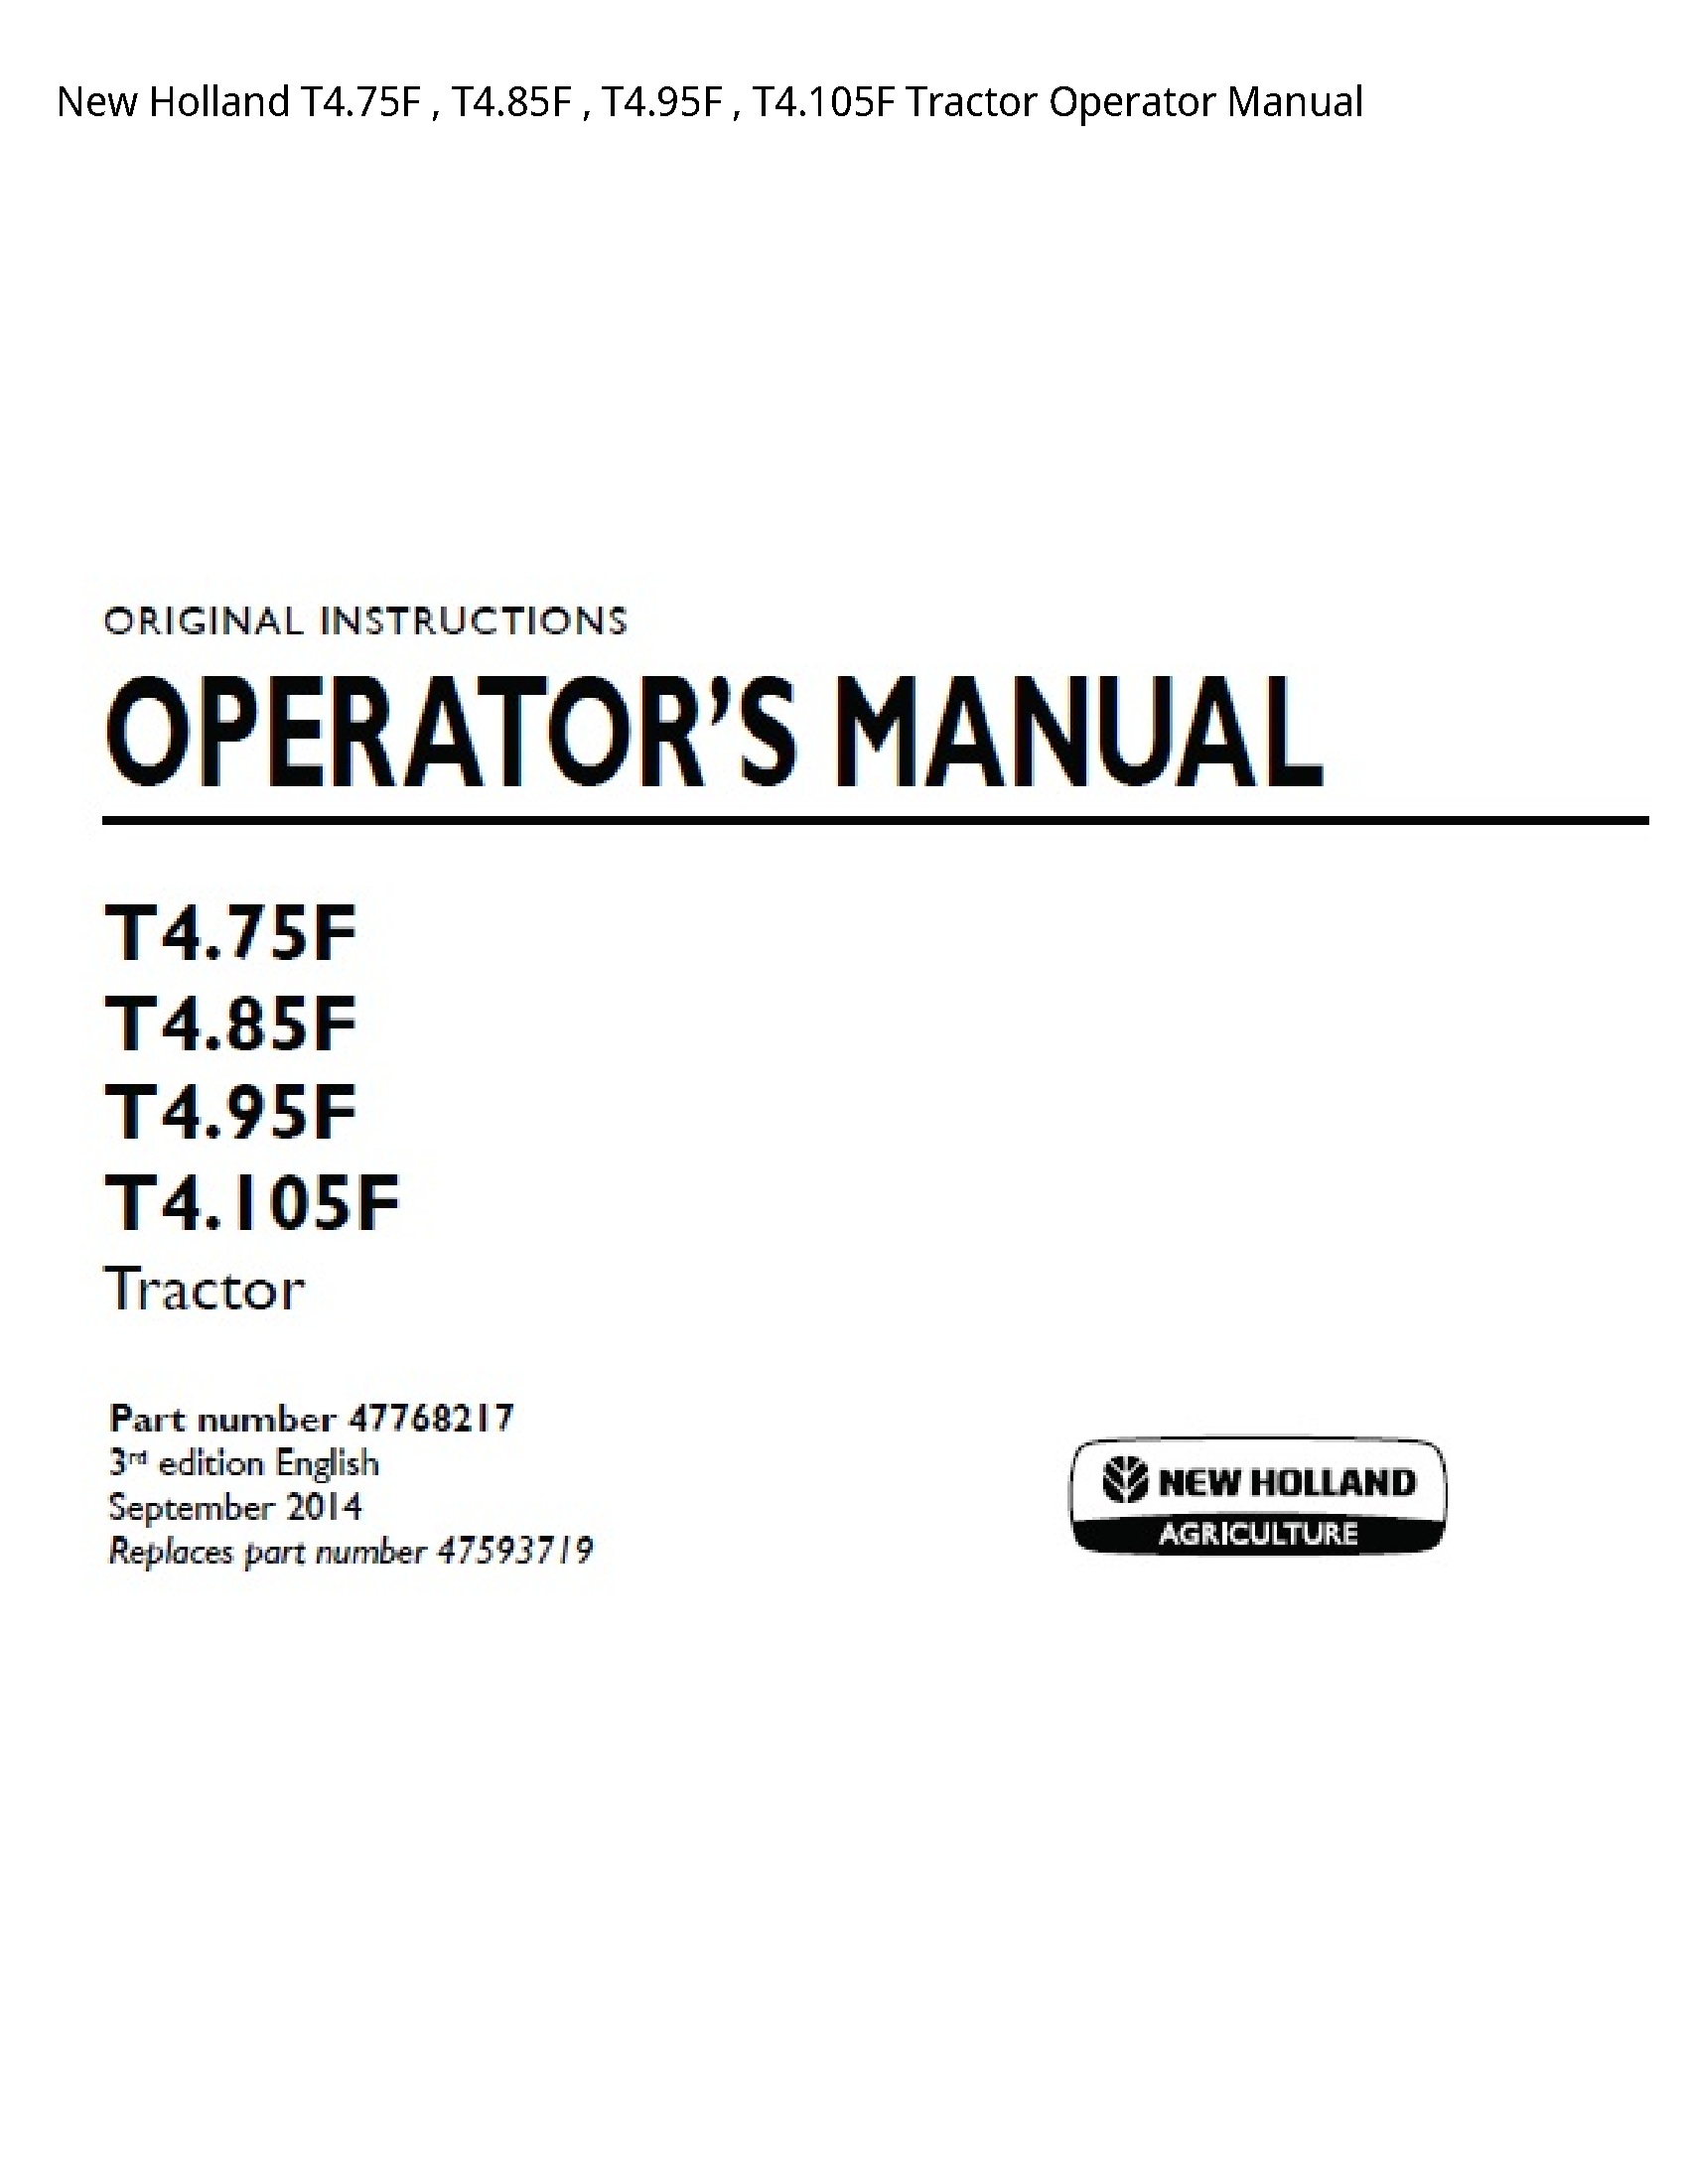 New Holland T4.75F Tractor Operator manual